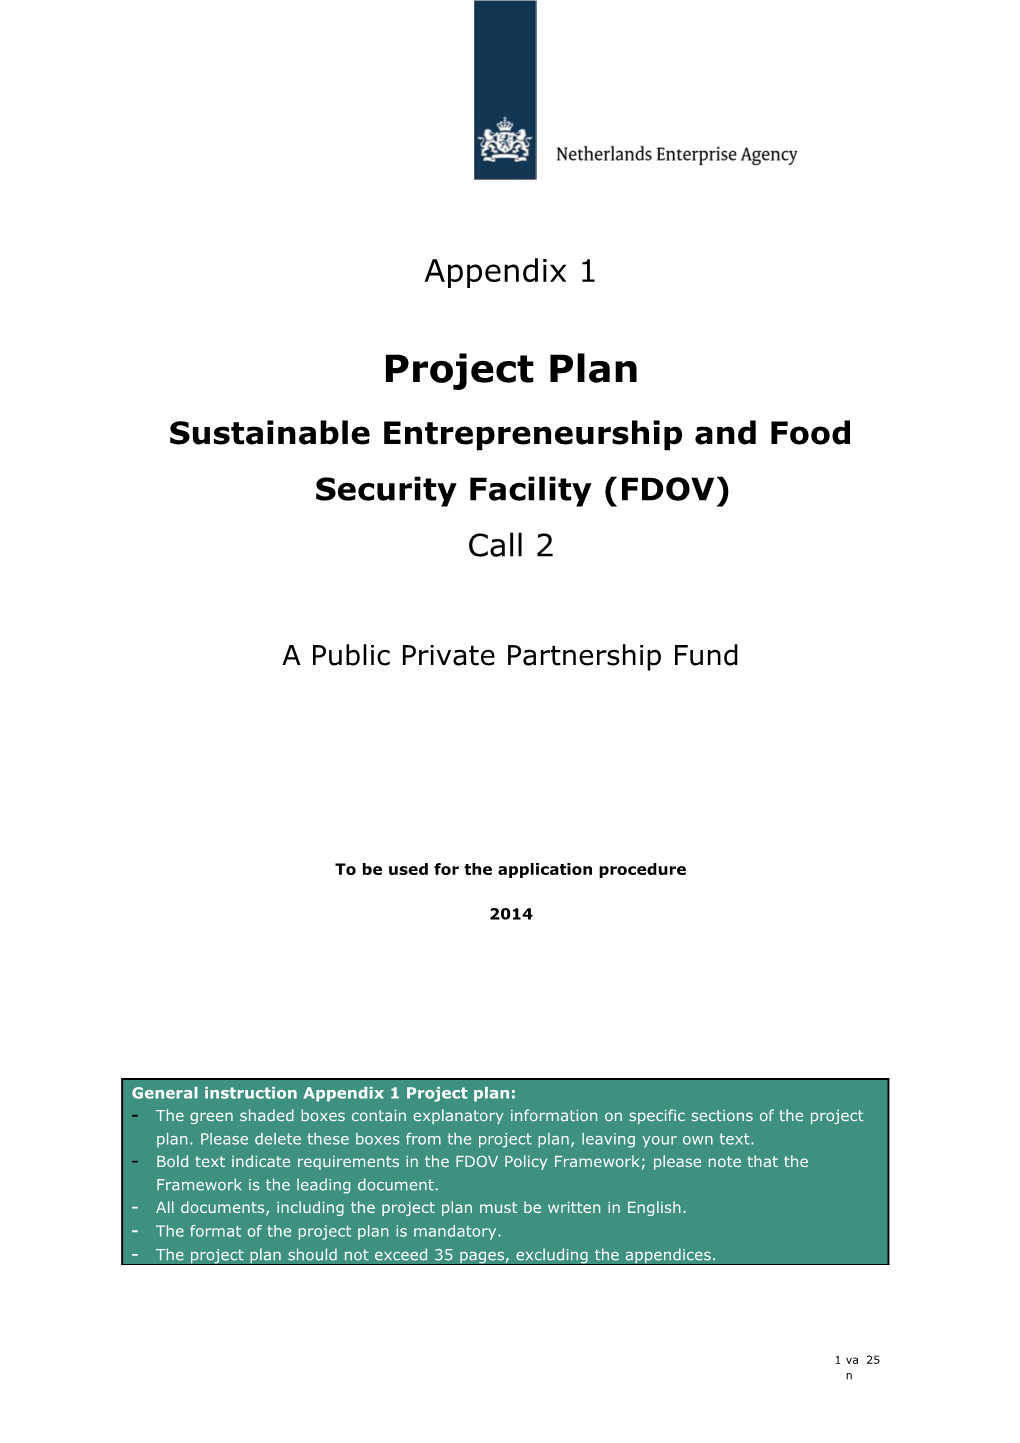 Sustainable Entrepreneurship and Food Security Facility (FDOV)